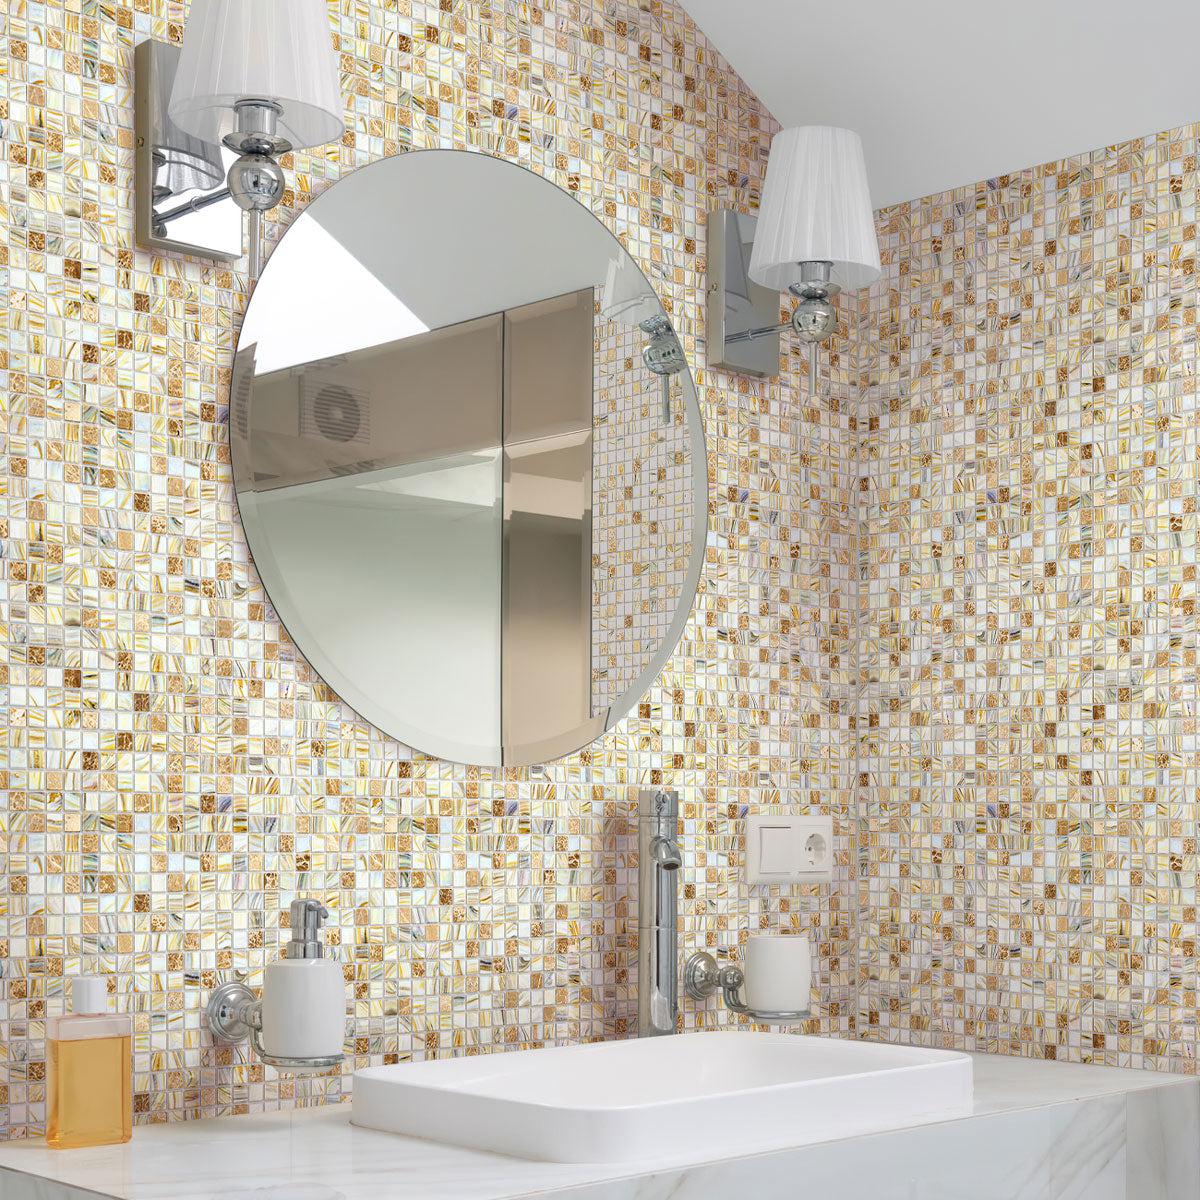 Amber Sedimentary Squares Glass Tile creates a natural and calming bathroom